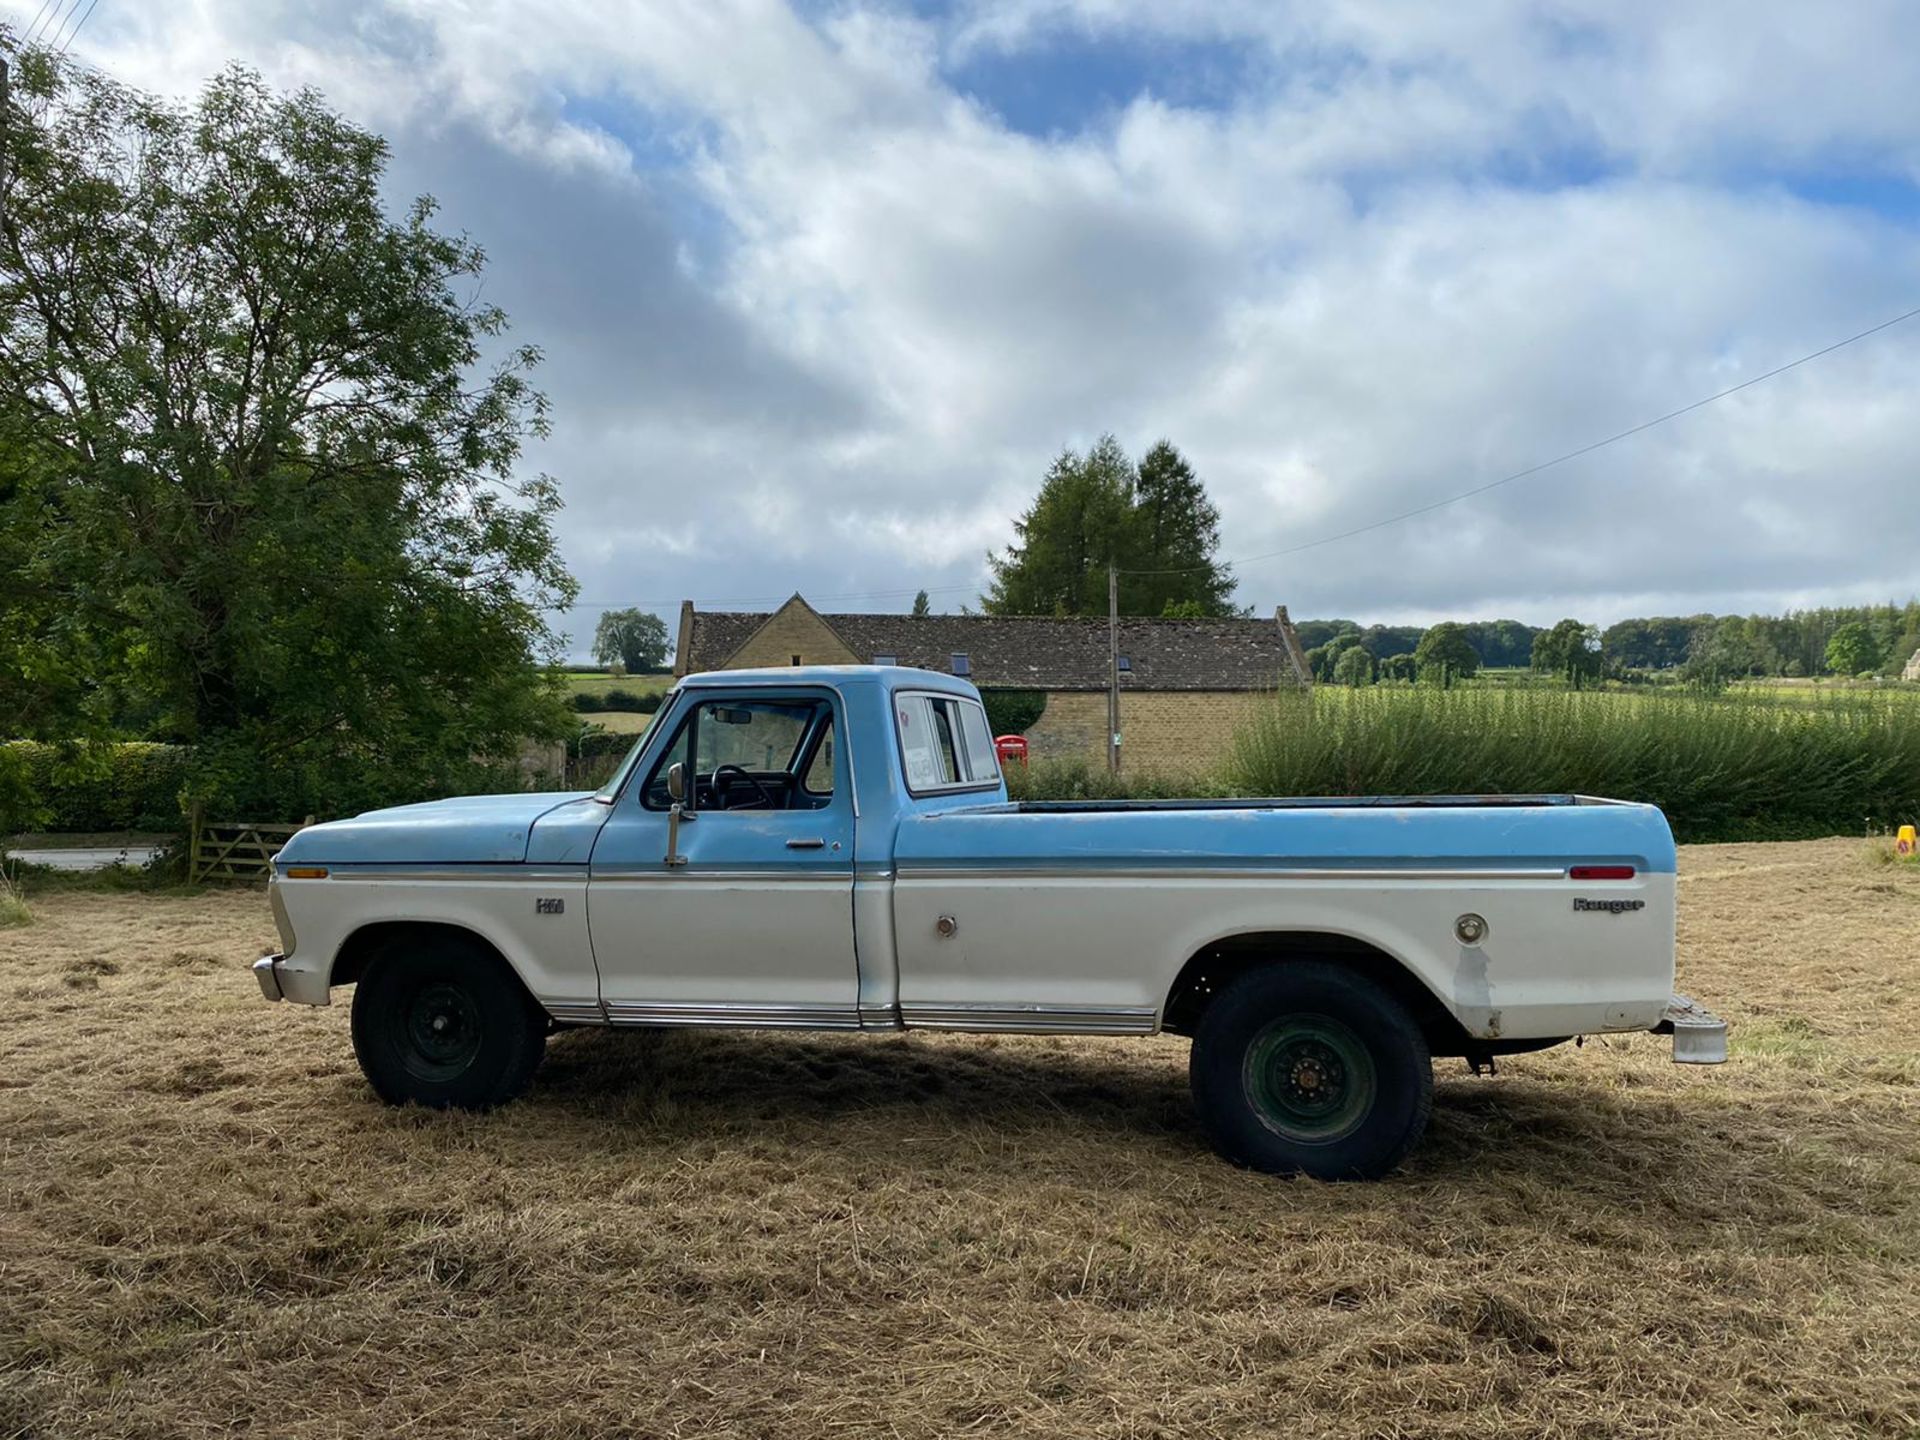 1975 FORD F-250 6.4 (390) V8, 4 SPEED MANUAL, HAS JUST BEEN REGISTERED, NEW BENCH SEAT *NO VAT* - Image 7 of 22